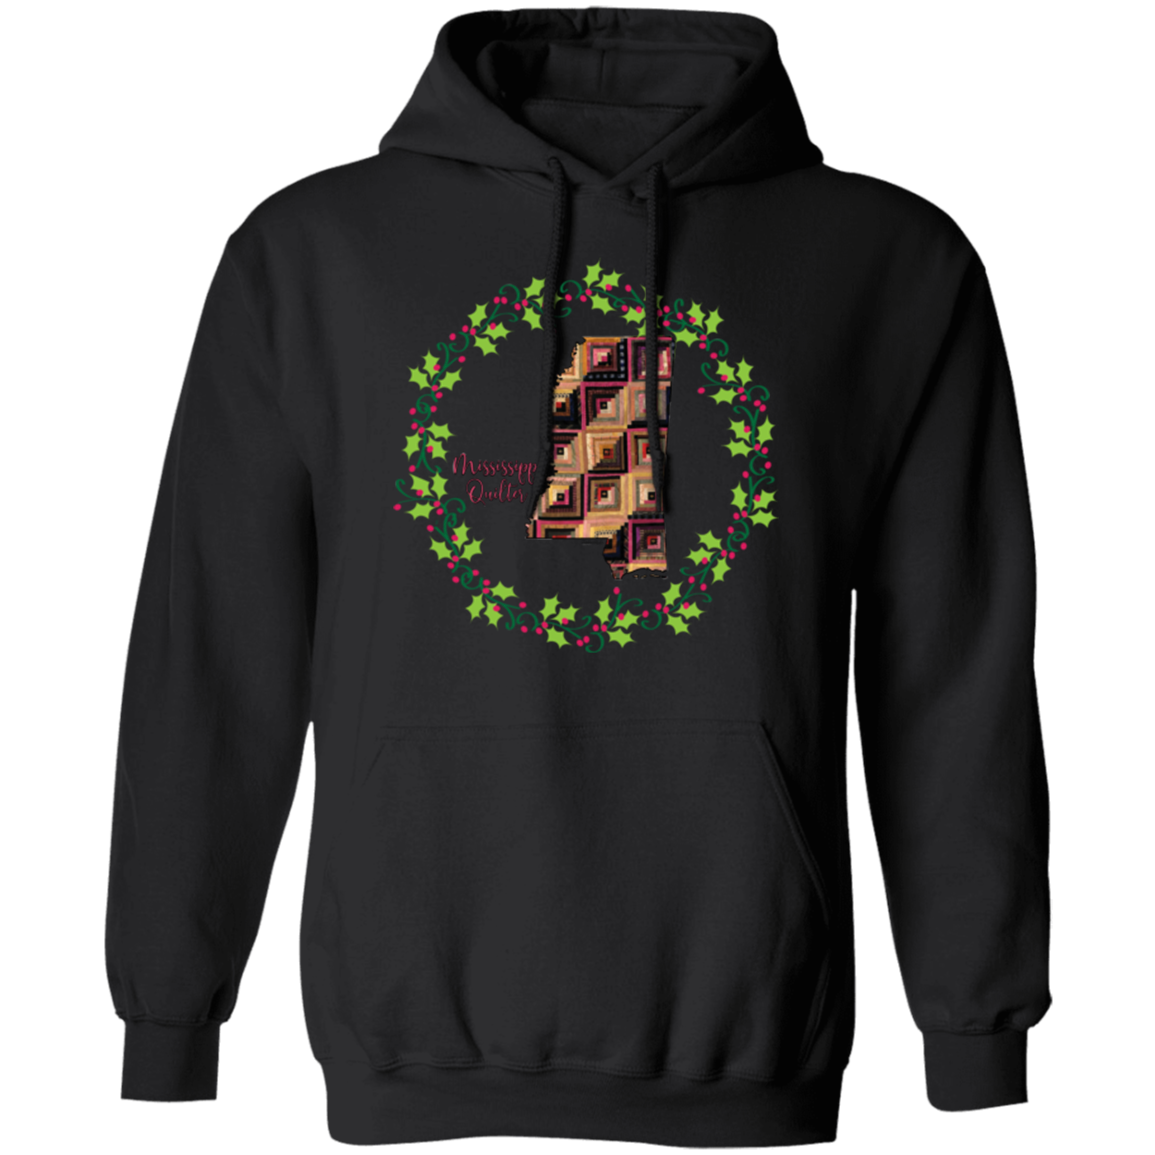 Mississippi Quilter Christmas Pullover Hoodie